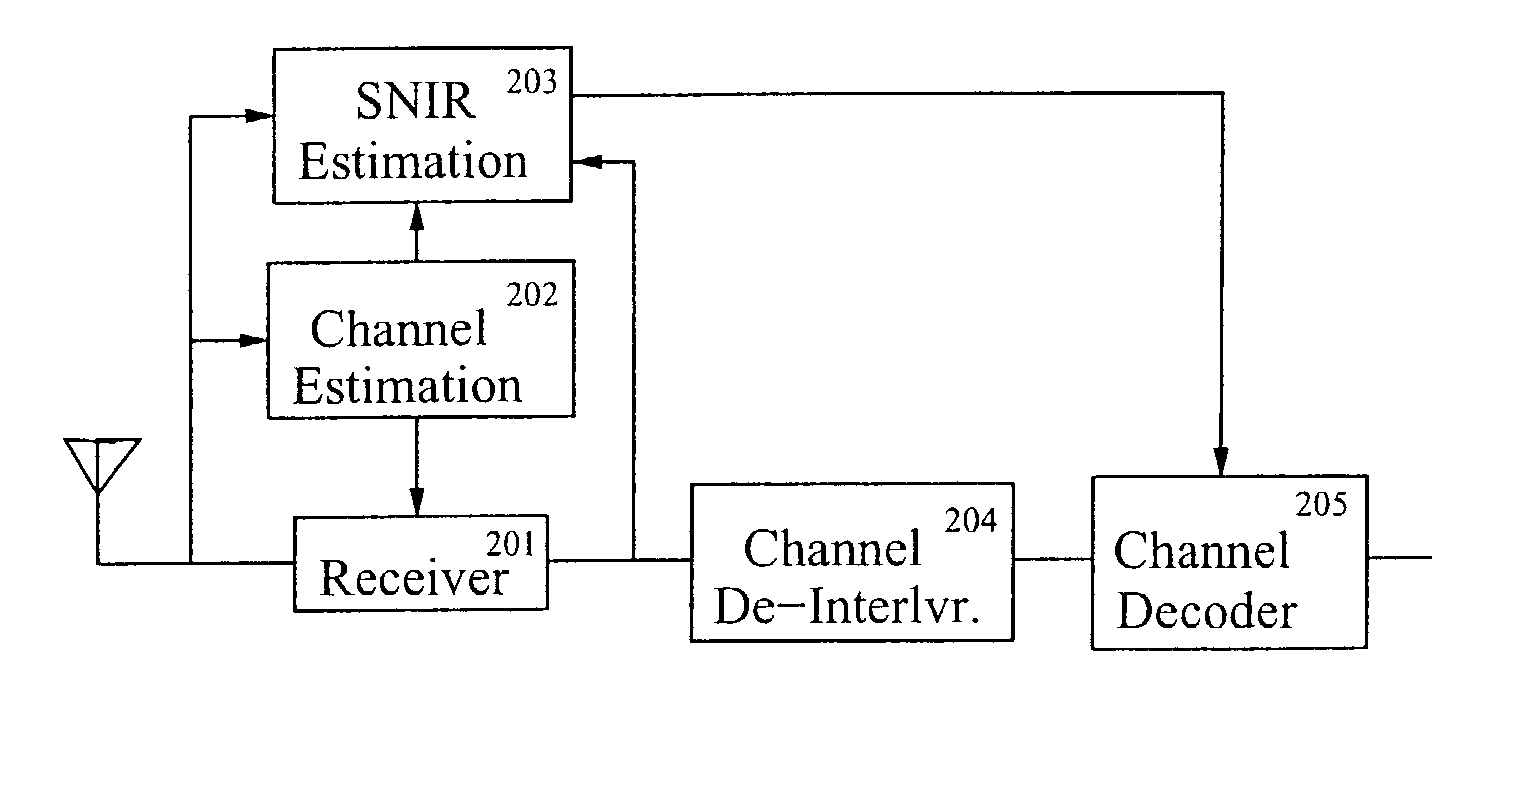 Channel code decoding for the CDMA forward link